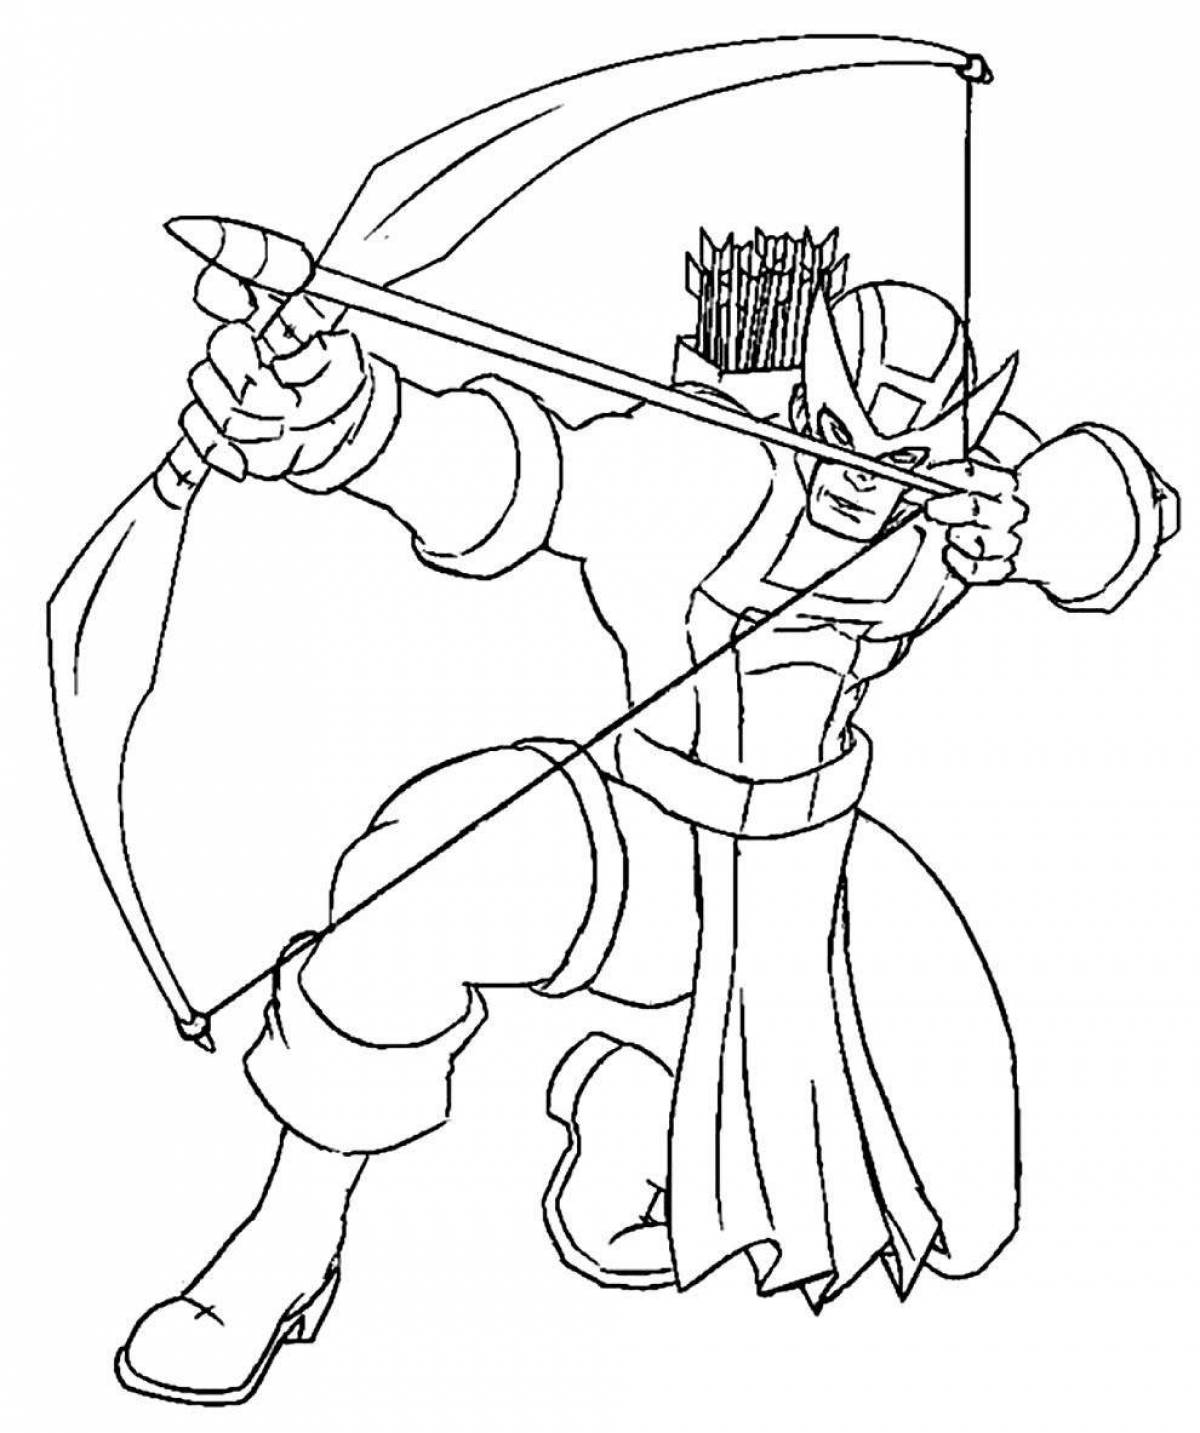 Colorful archer coloring page